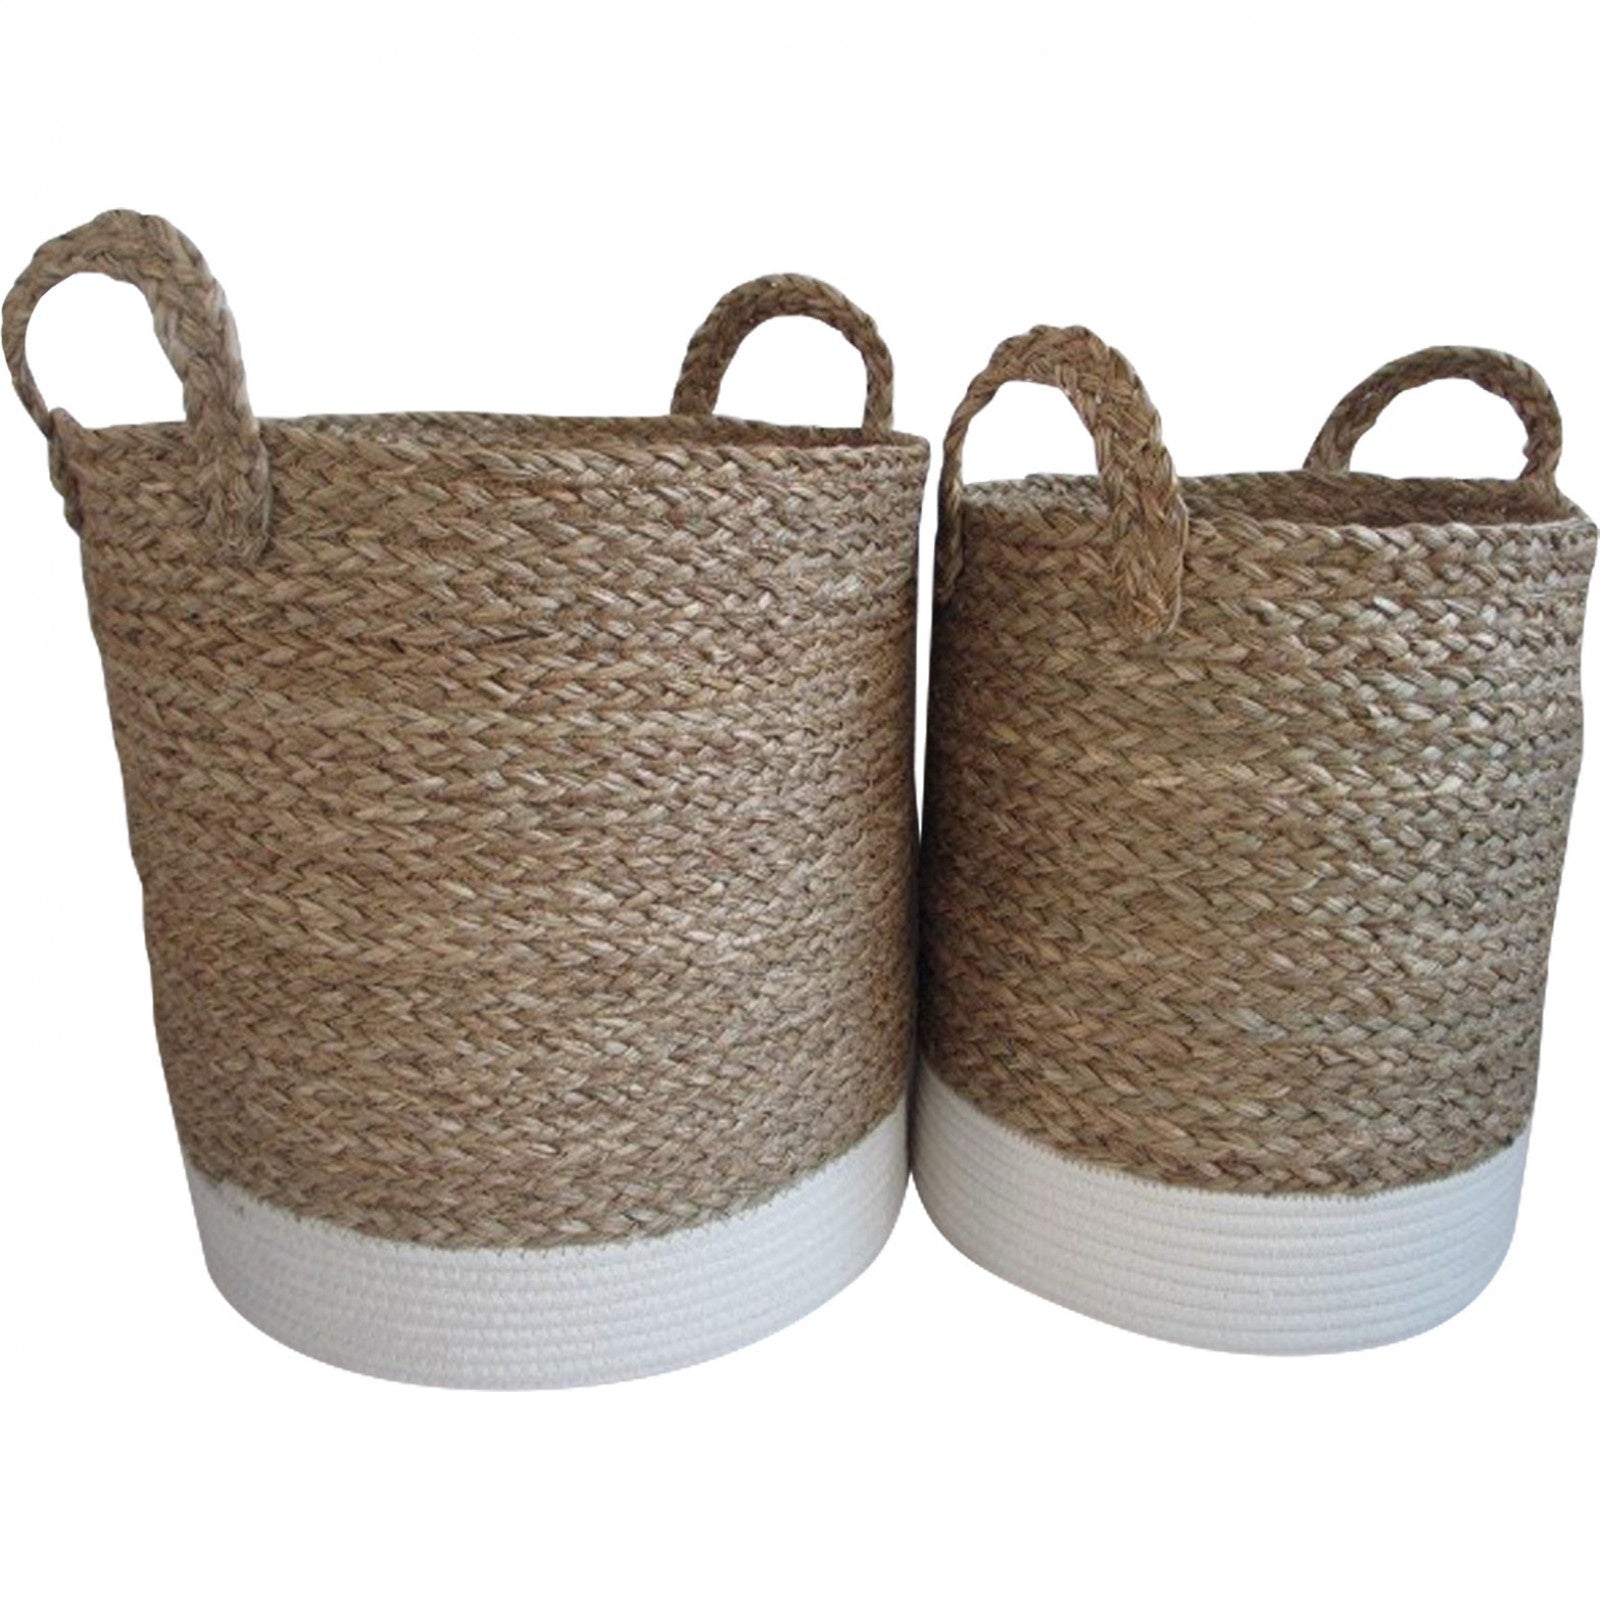 Basket with white woven base